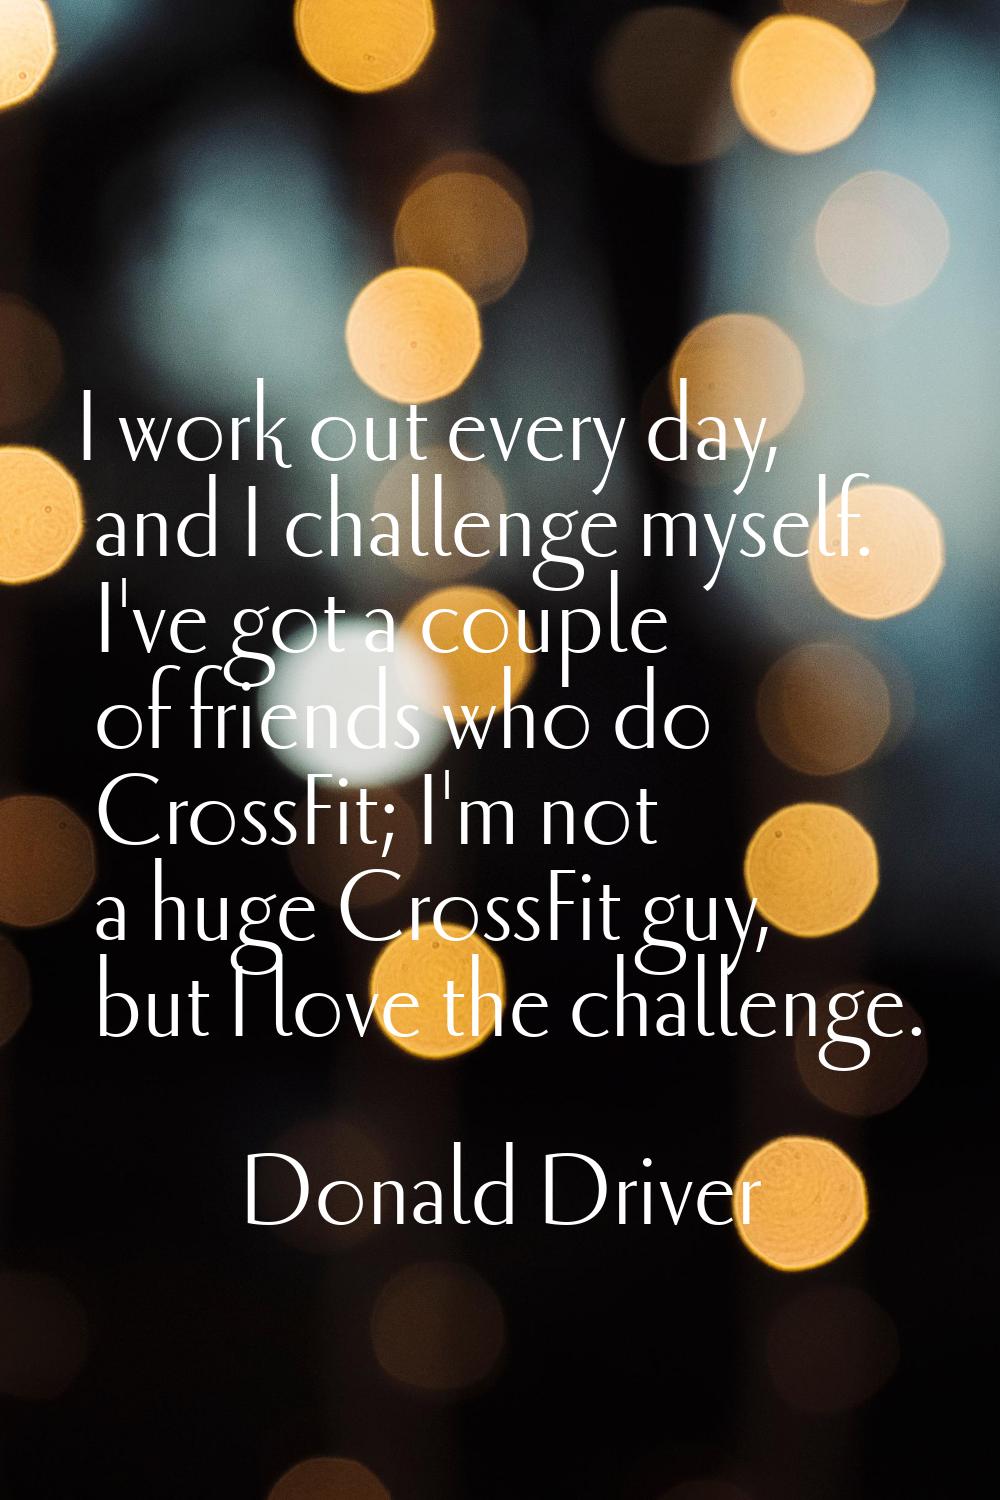 I work out every day, and I challenge myself. I've got a couple of friends who do CrossFit; I'm not